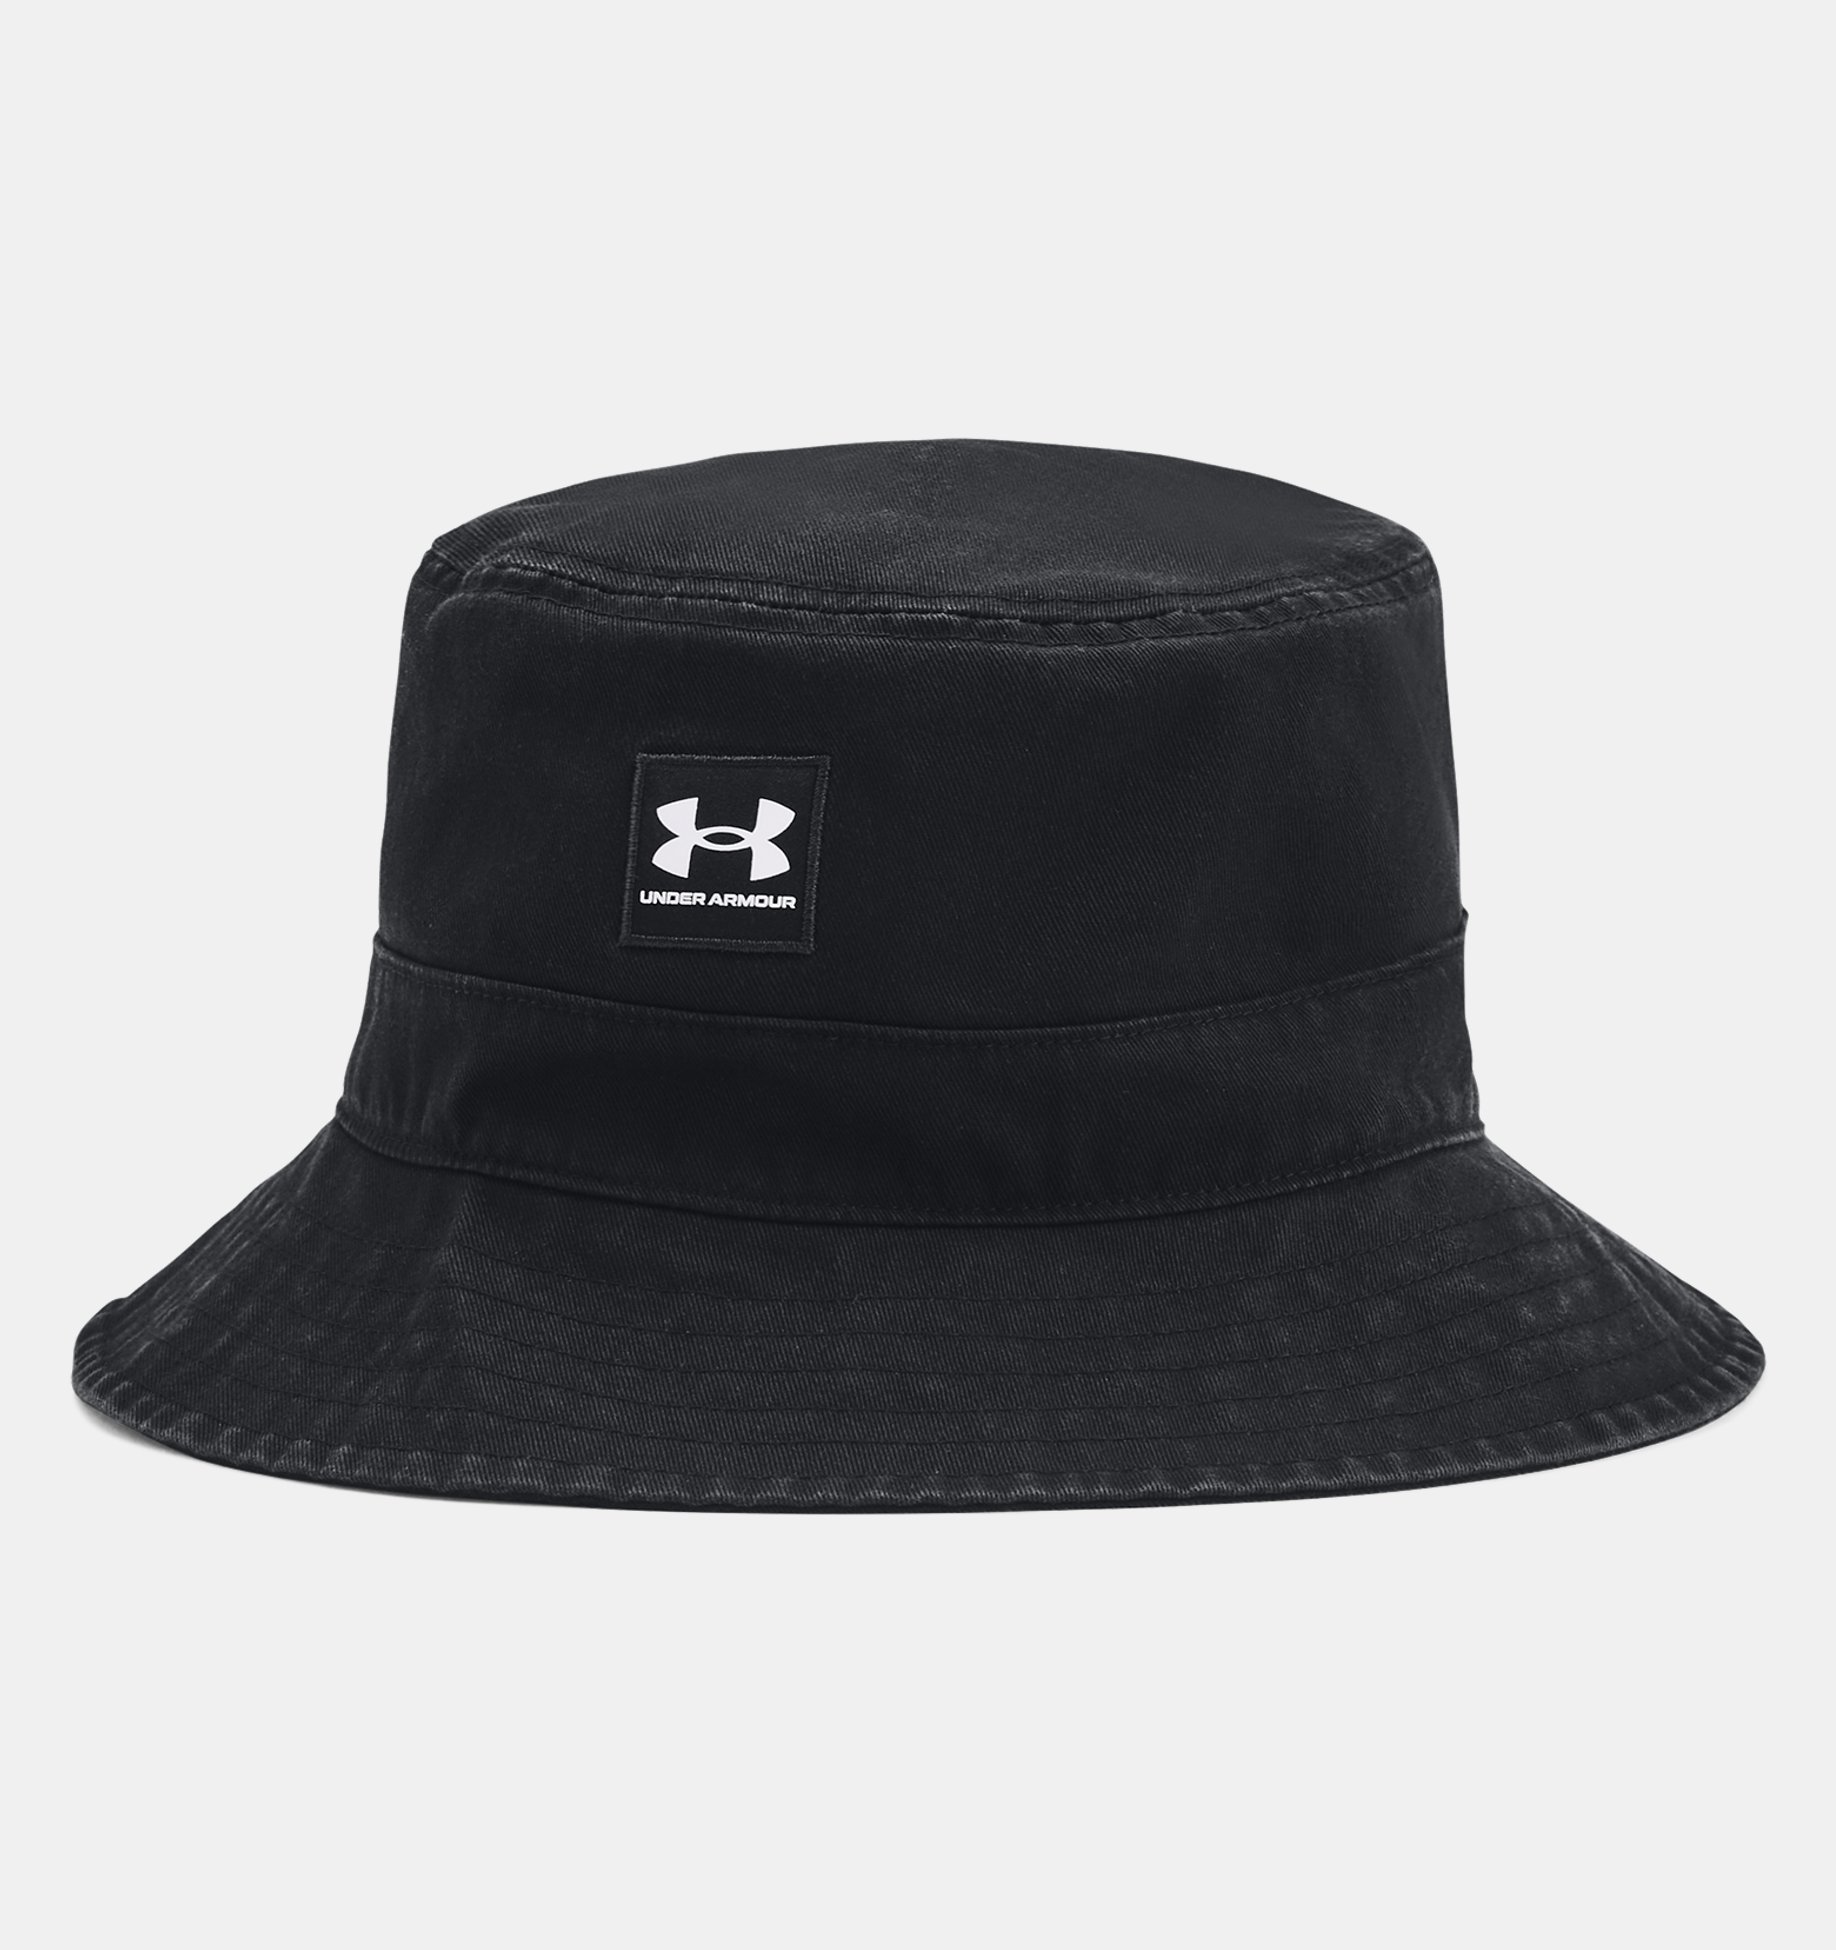 Under Armour Solid Hats for Men